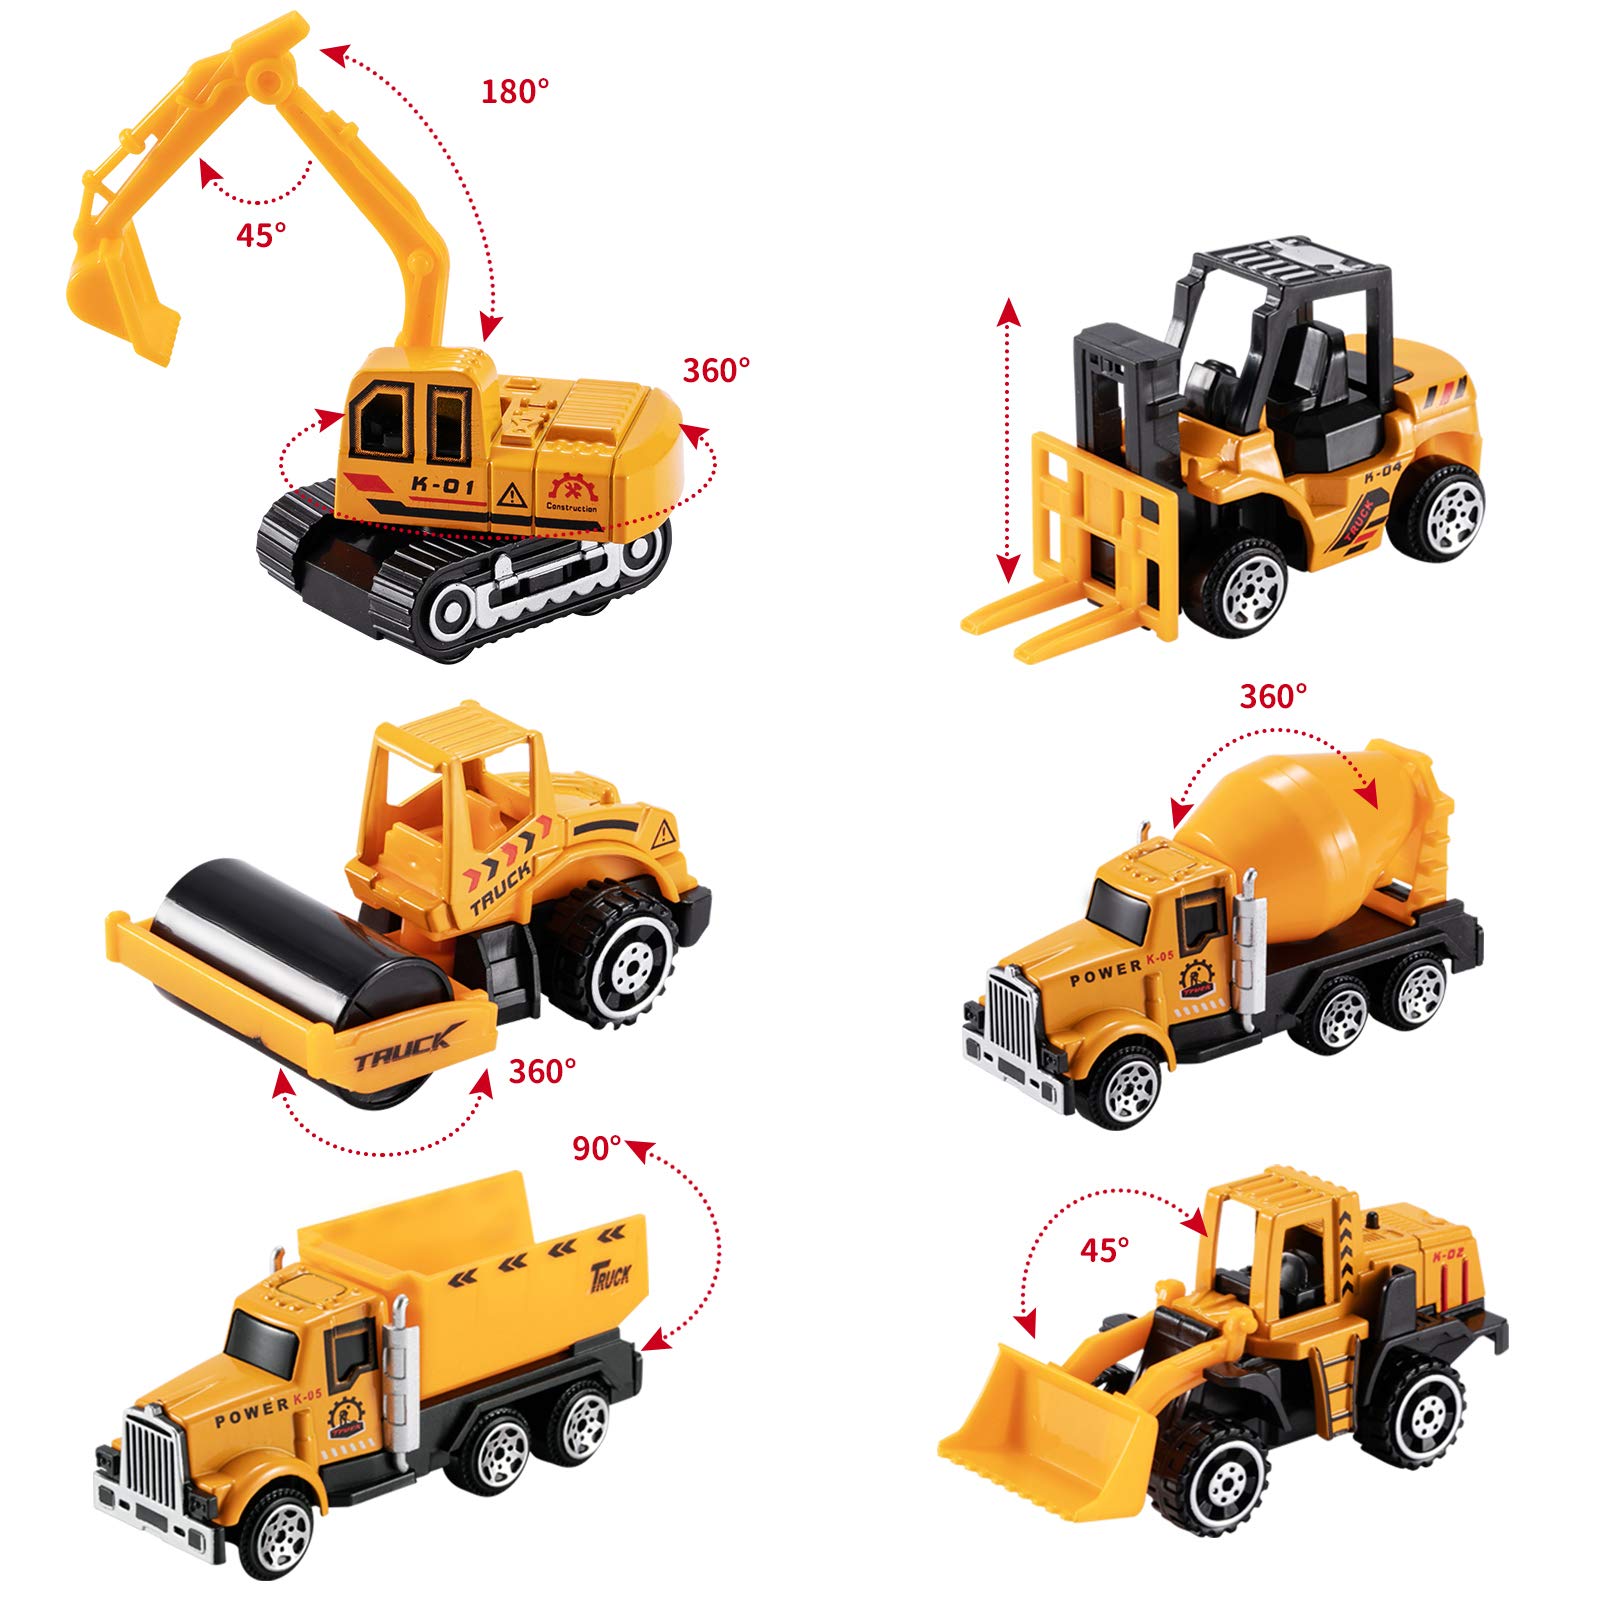 TEMI Diecast Engineering Construction Vehicle Toy Set w/ Play Mat,Truck Carrier,Forklift,Bulldozer,Excavator,Mixer,Dump Truck, Alloy Metal Car Toys Set for 3 4 5 6 Years Old Toddlers Kids Boys & Girls